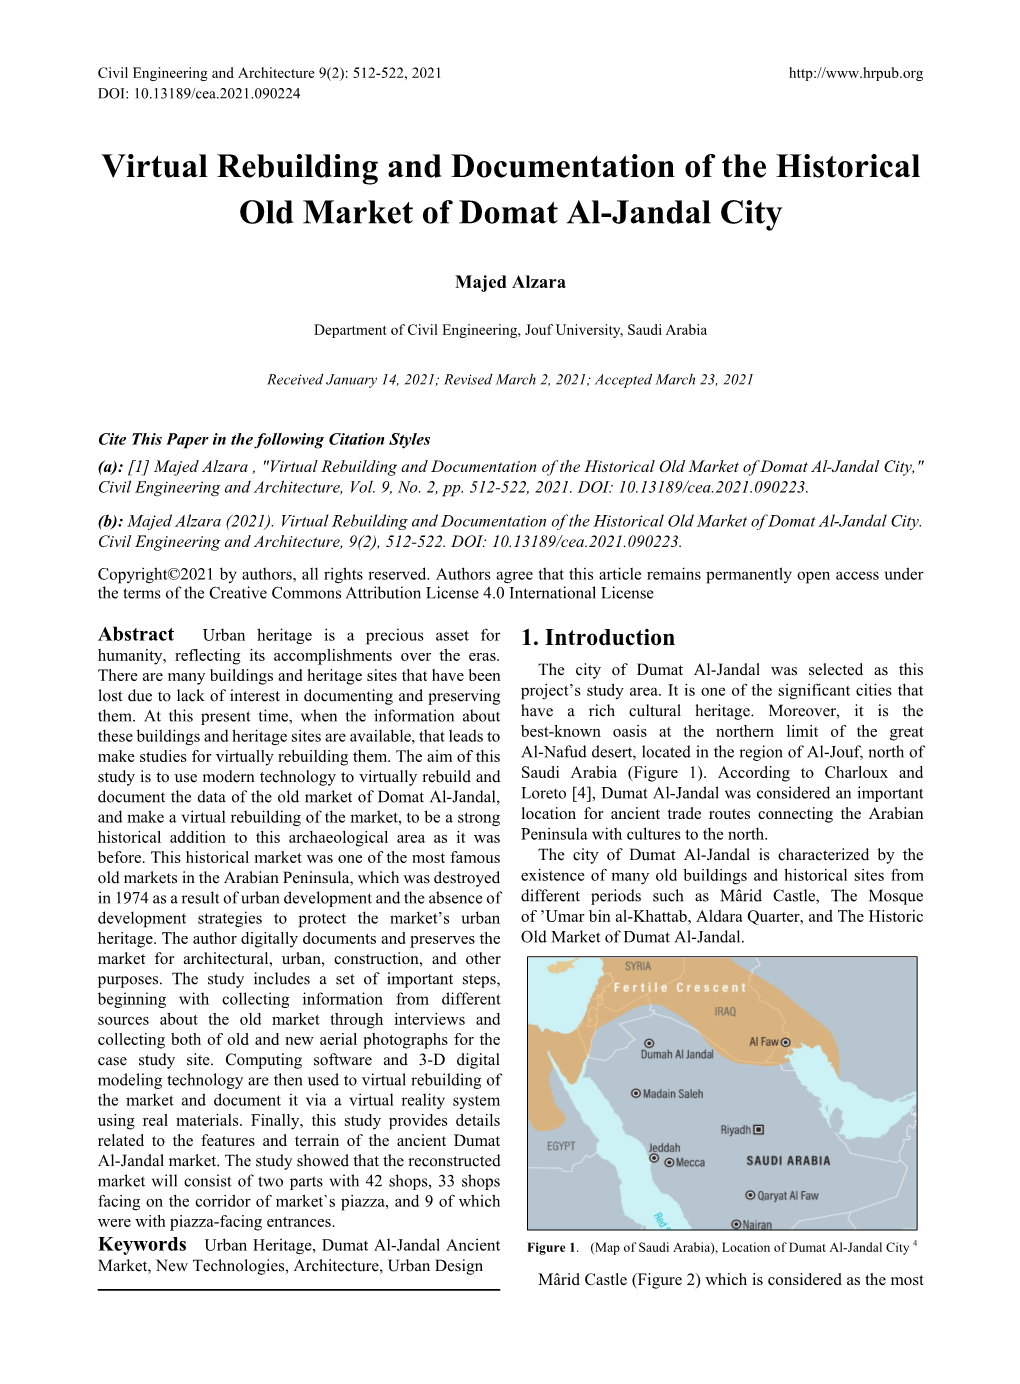 Virtual Rebuilding and Documentation of the Historical Old Market of Domat Al-Jandal City